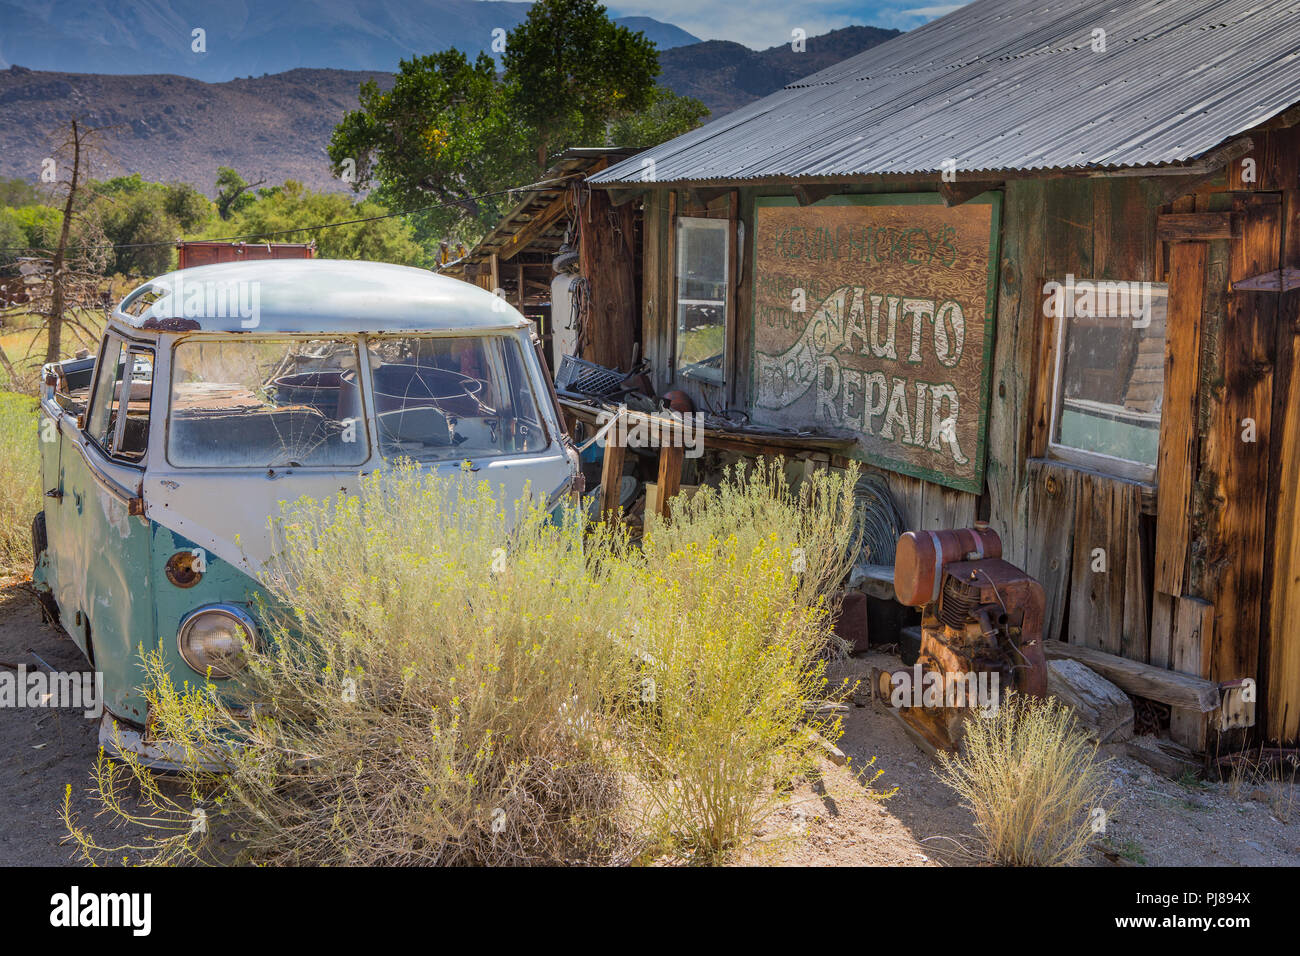 Old rusting Volkswagen van and  in the town of Benton Hot Springs on Highway 120 in California USA Stock Photo